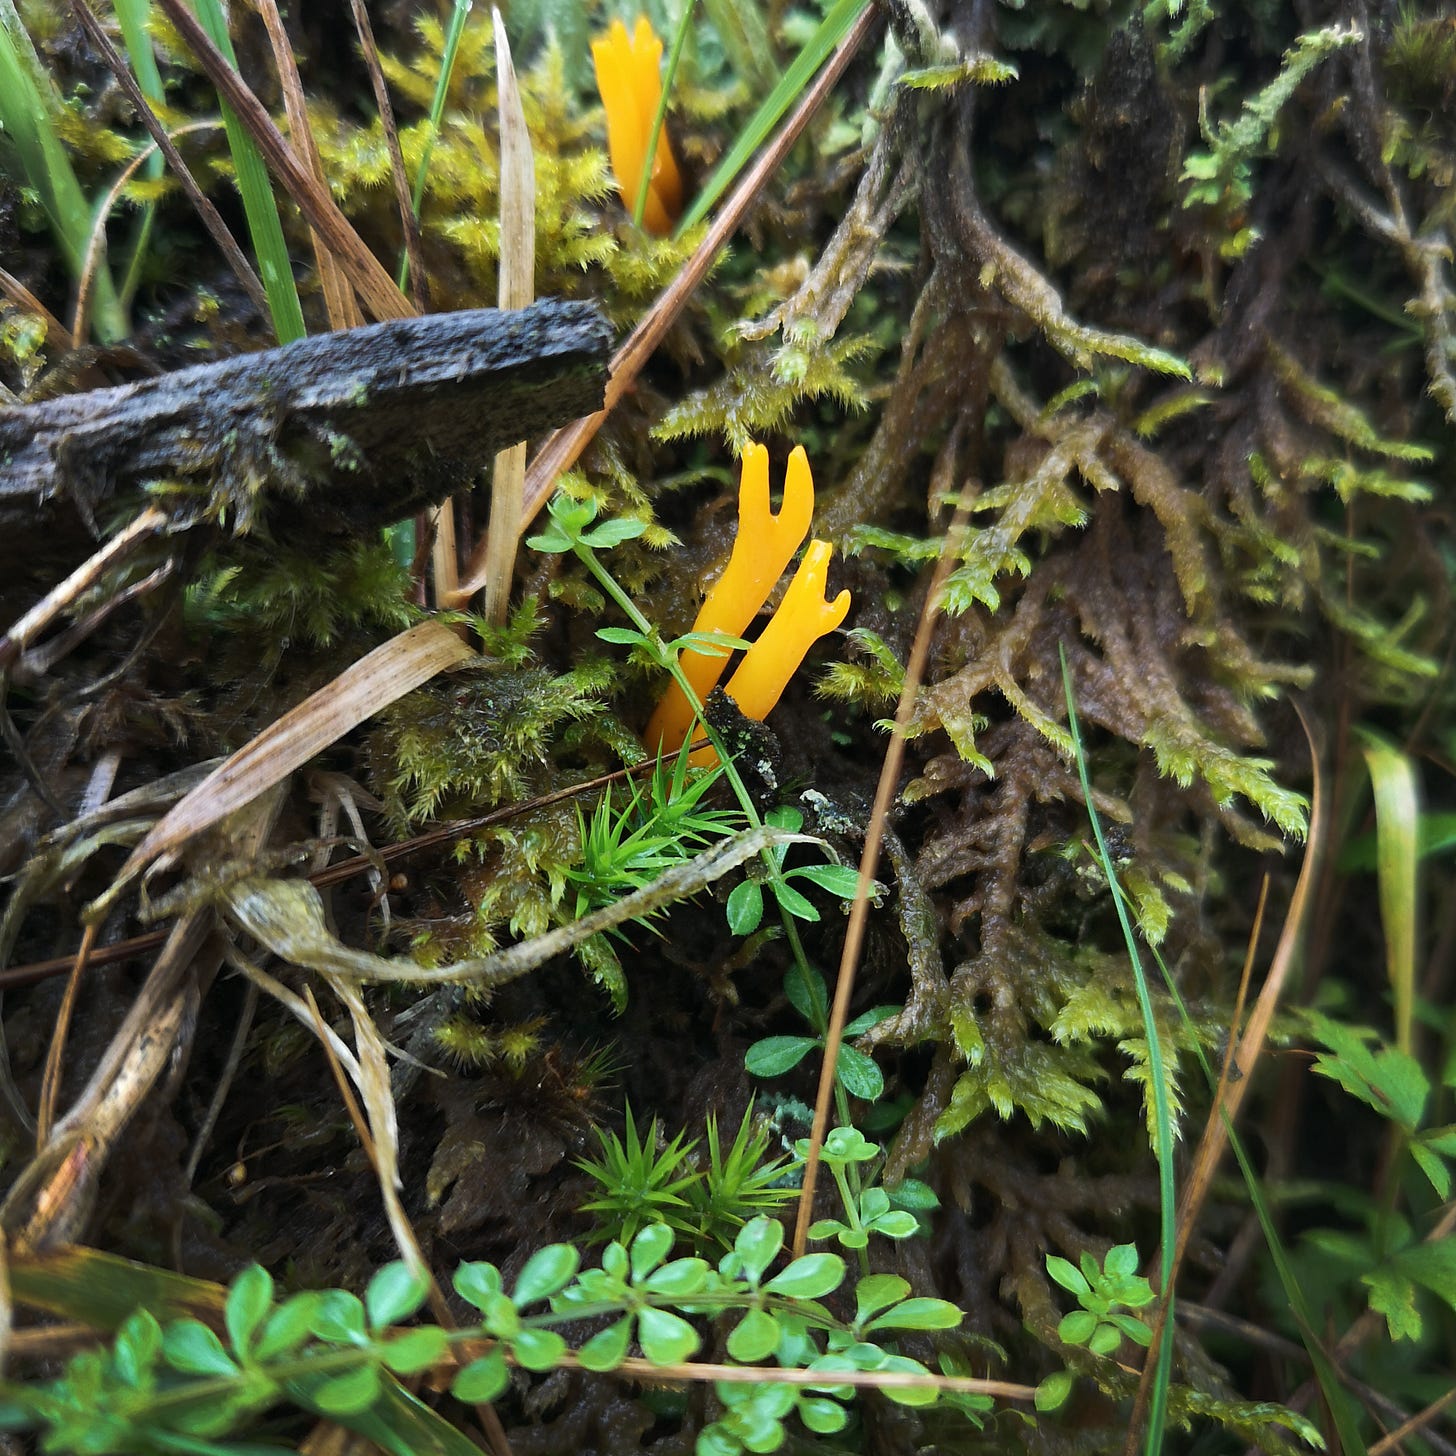 Image description: bright bright orange fingers of staghorn fungus just beginning to emerge from a mossy log.